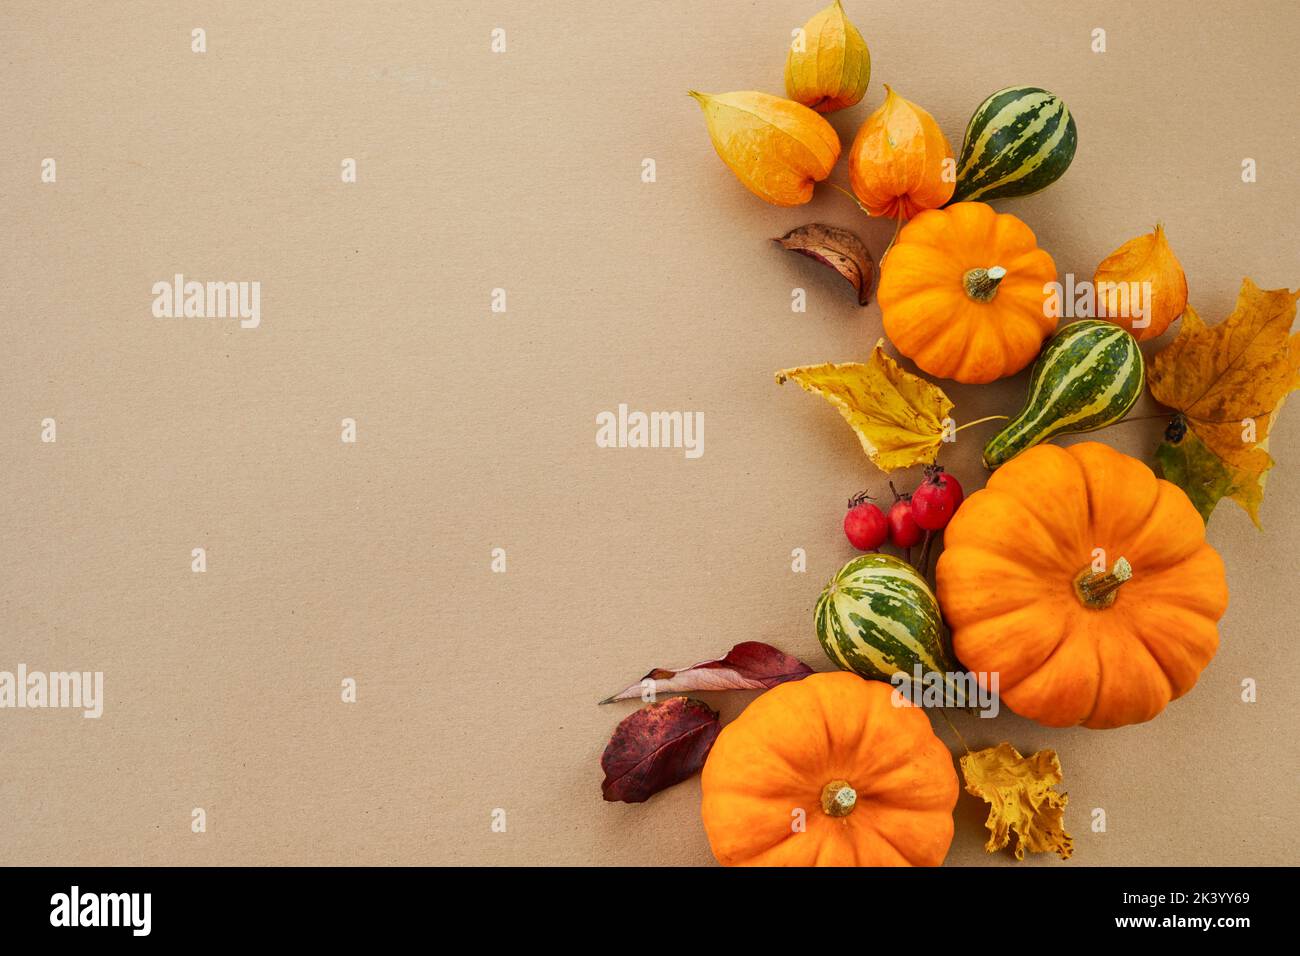 Autumn composition. Pumpkins and flowers on pastel background. Autumn, fall and thanksgiving day concept. Stock Photo